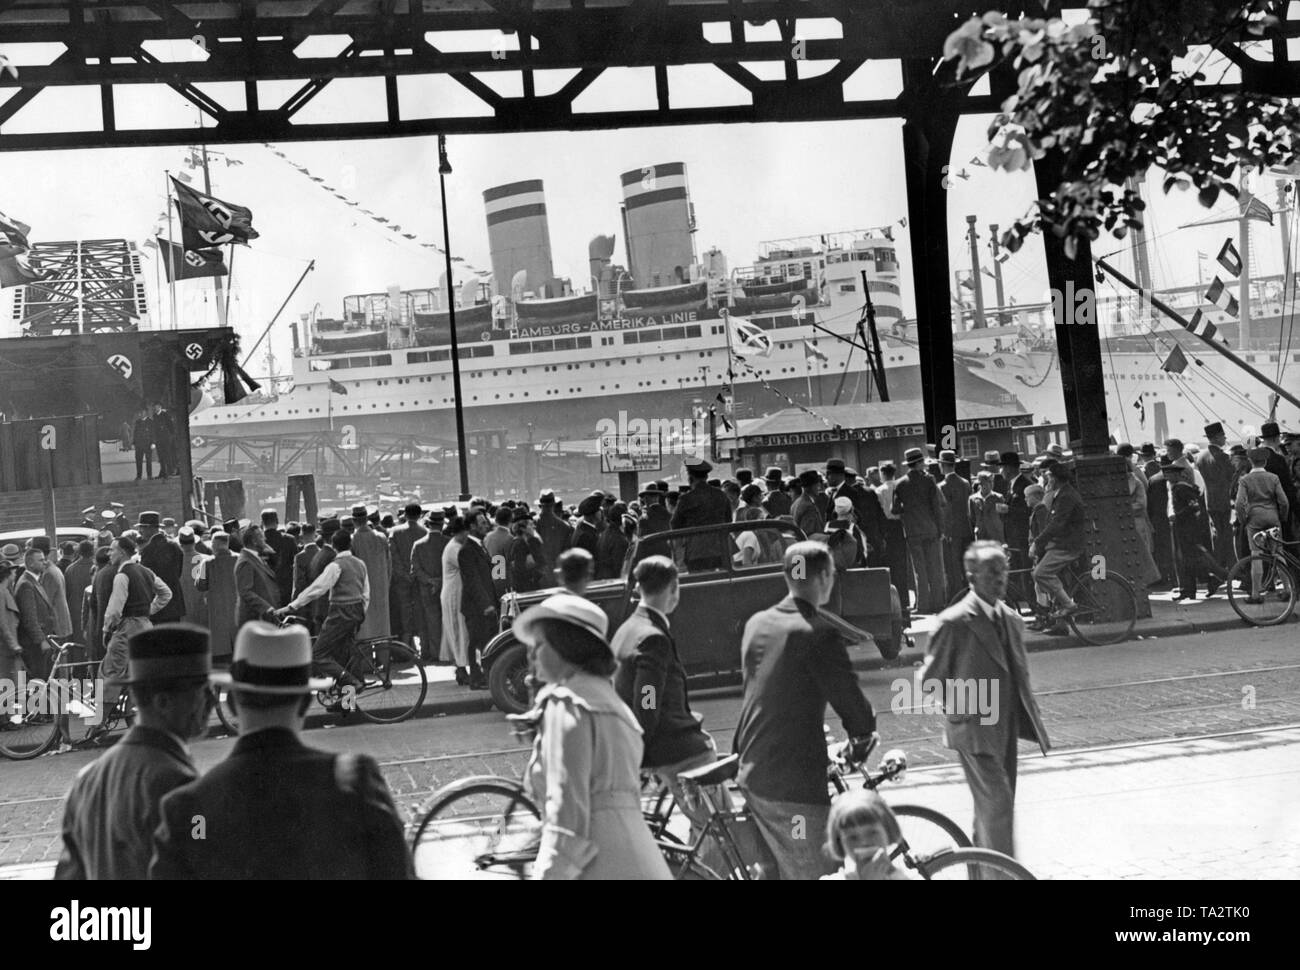 The HAPAG steamer 'Hamburg' during the celebrations marking the 'Day of the Seafaring' in front of the jetties. On board the 'Hamburg' were many guests of honor. Stock Photo